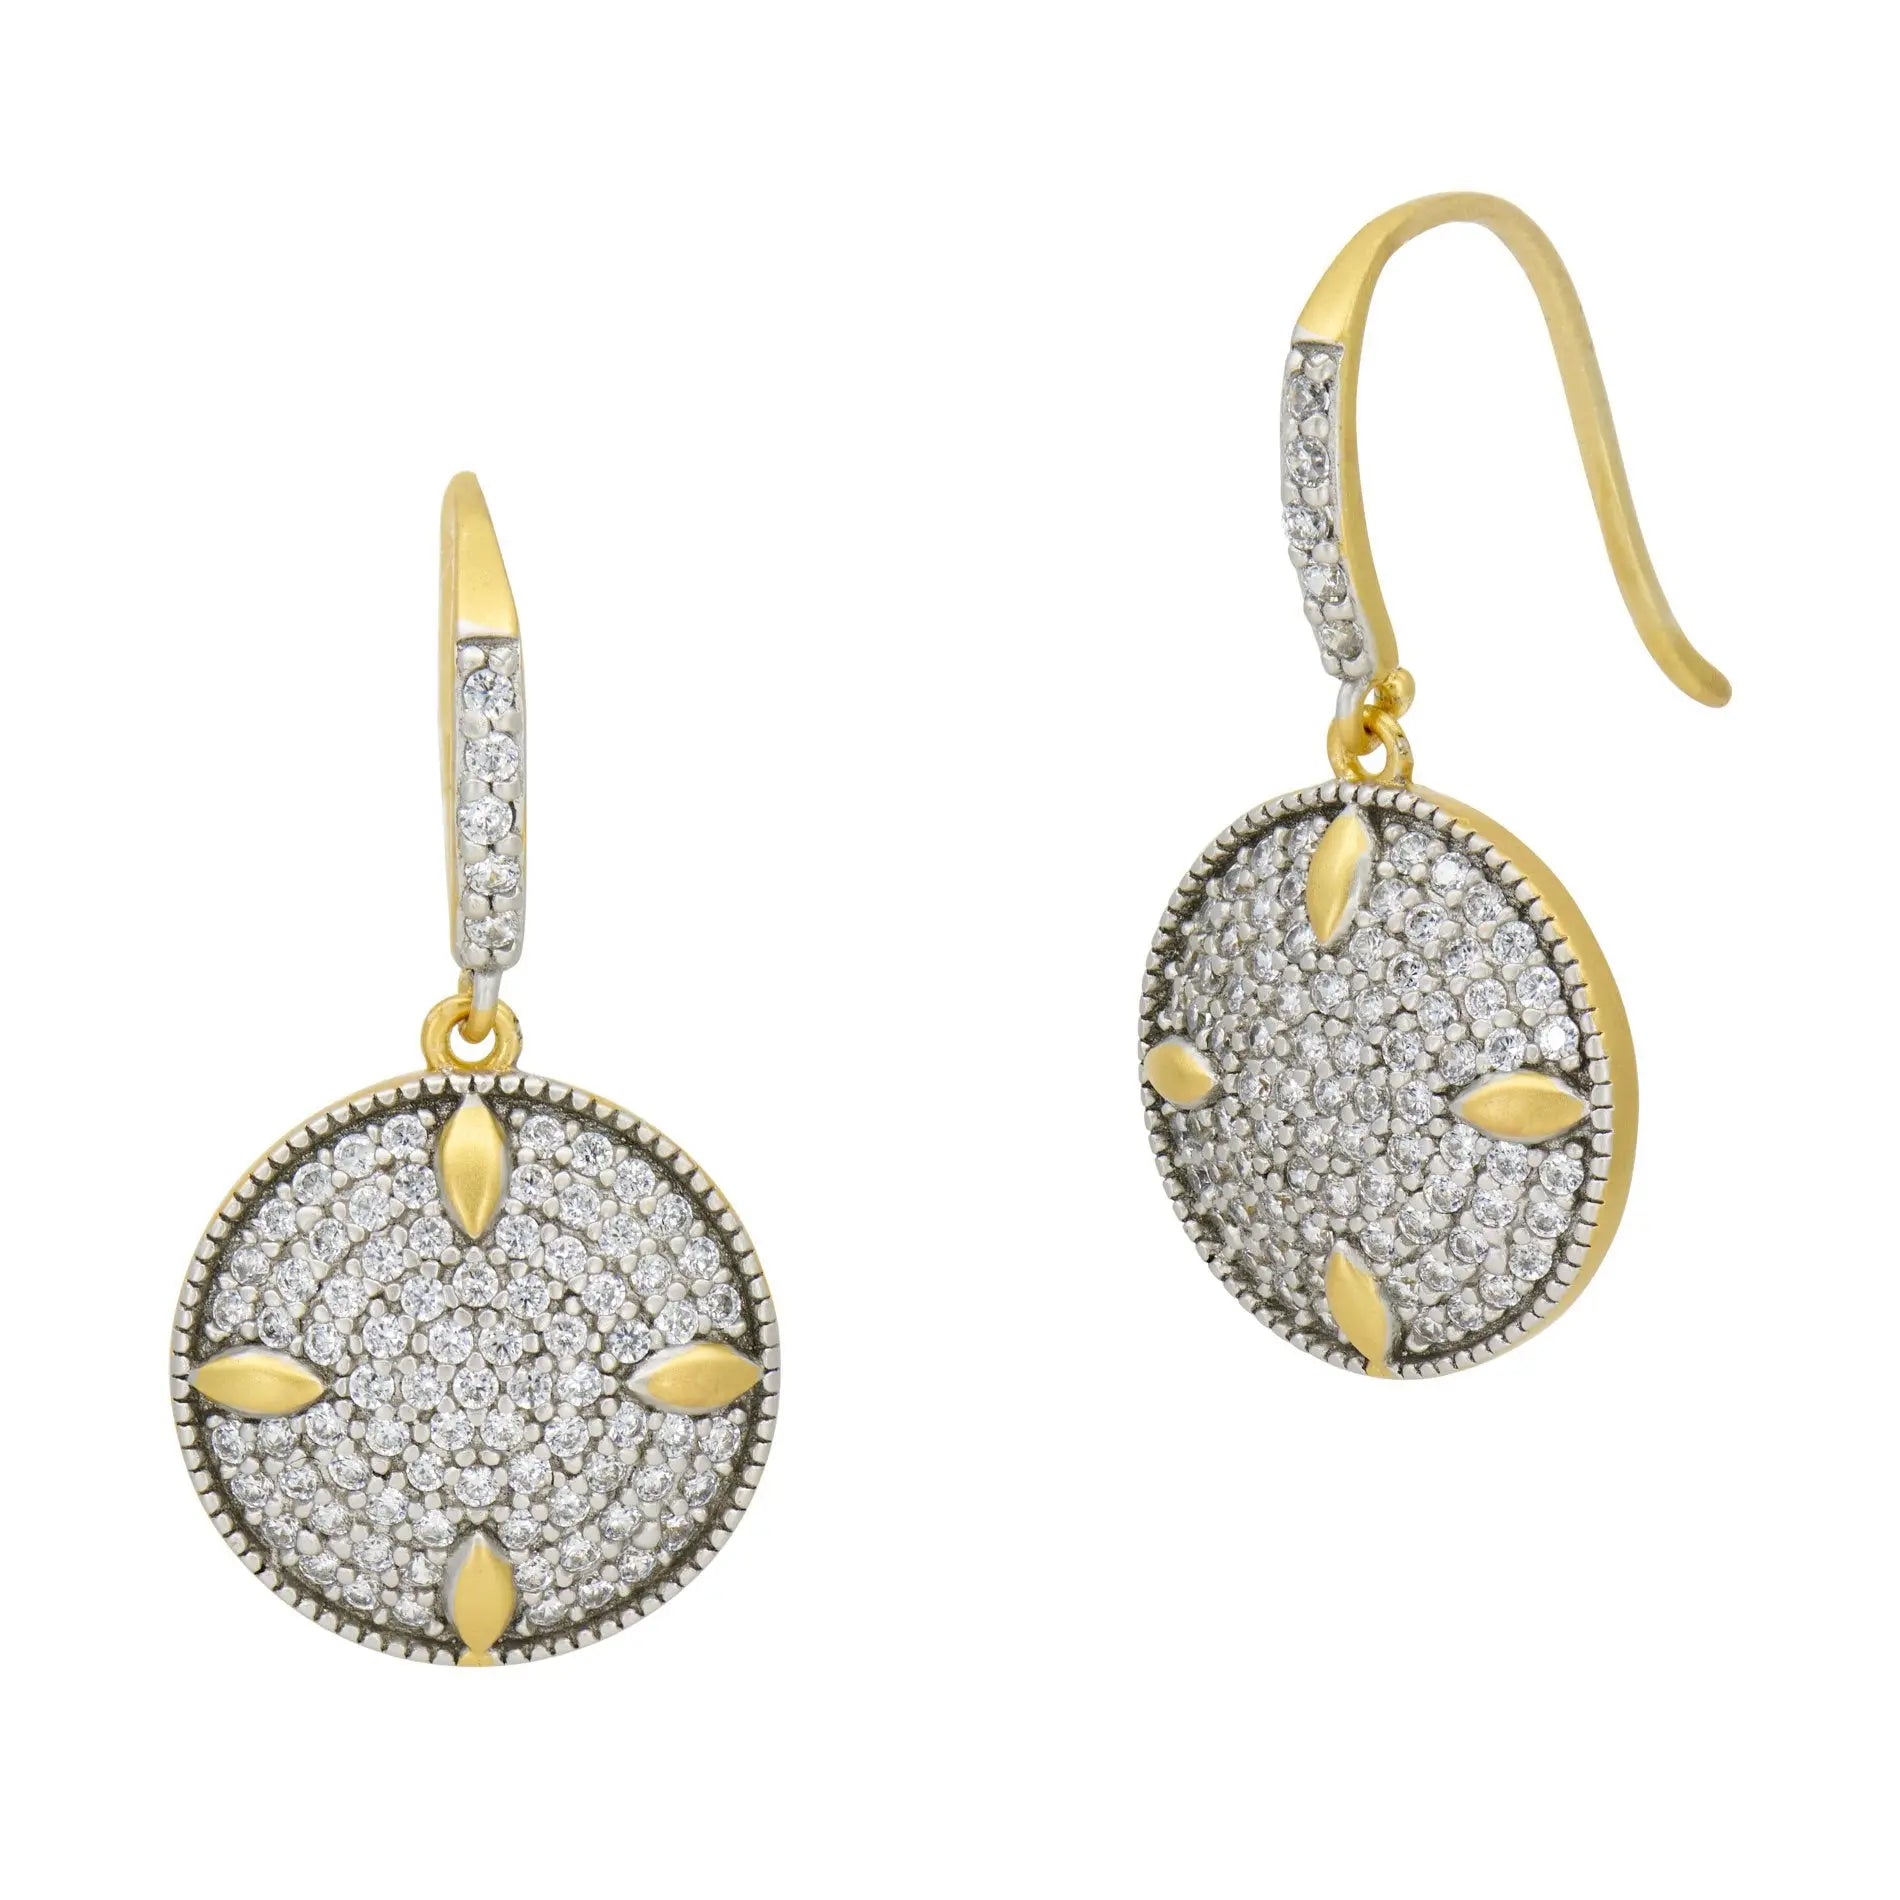 FR Petals and Pavé Disc Earring